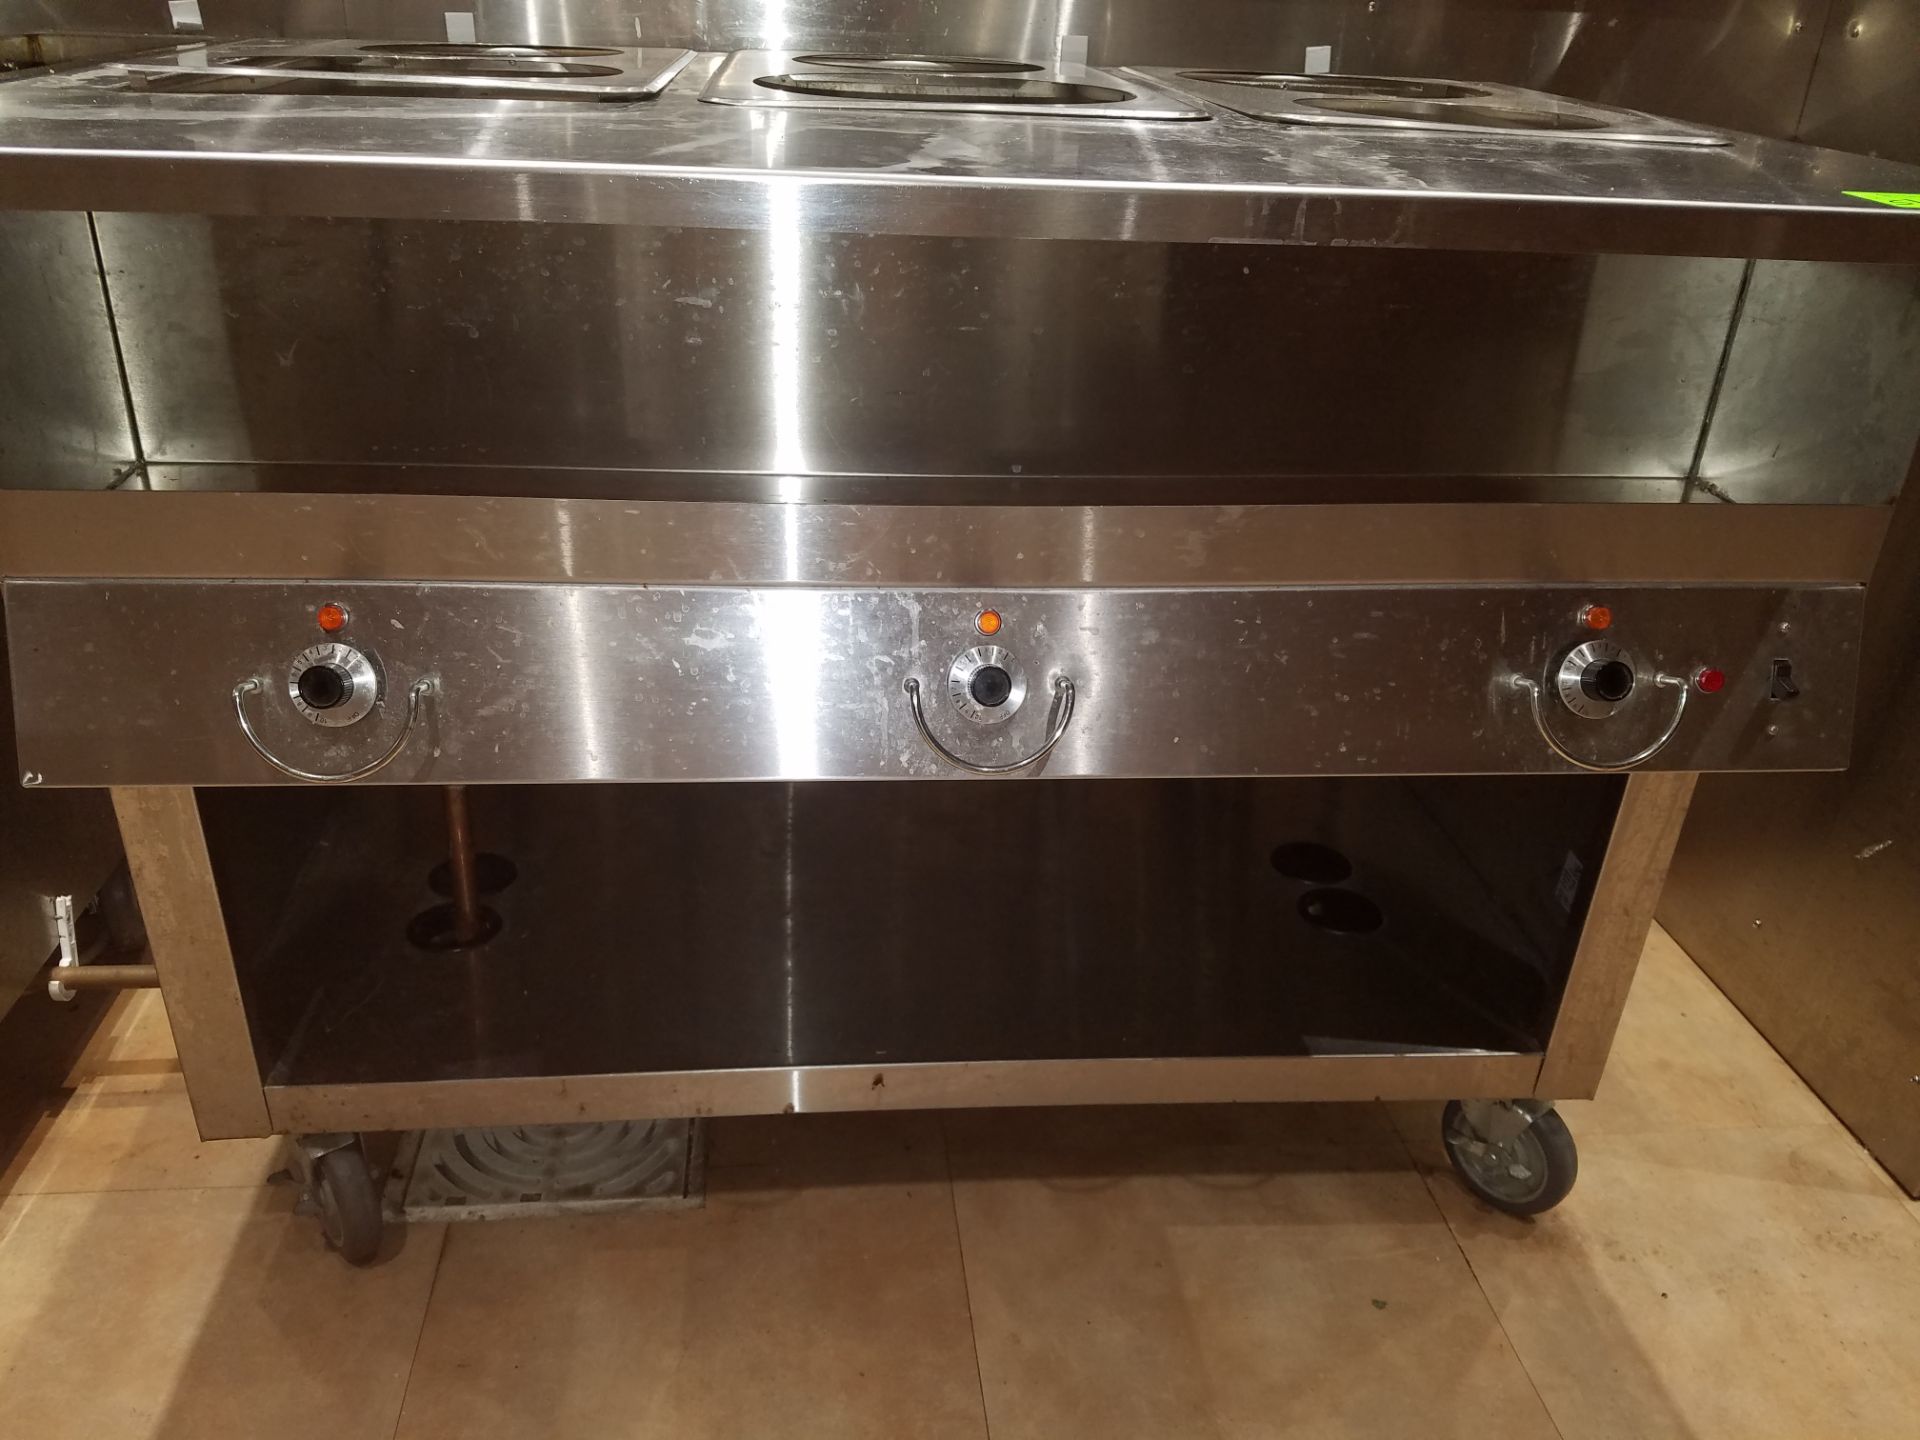 Thermaduke hot food steam table, model #E, 46", electric, stainless steel on castors - Image 2 of 3